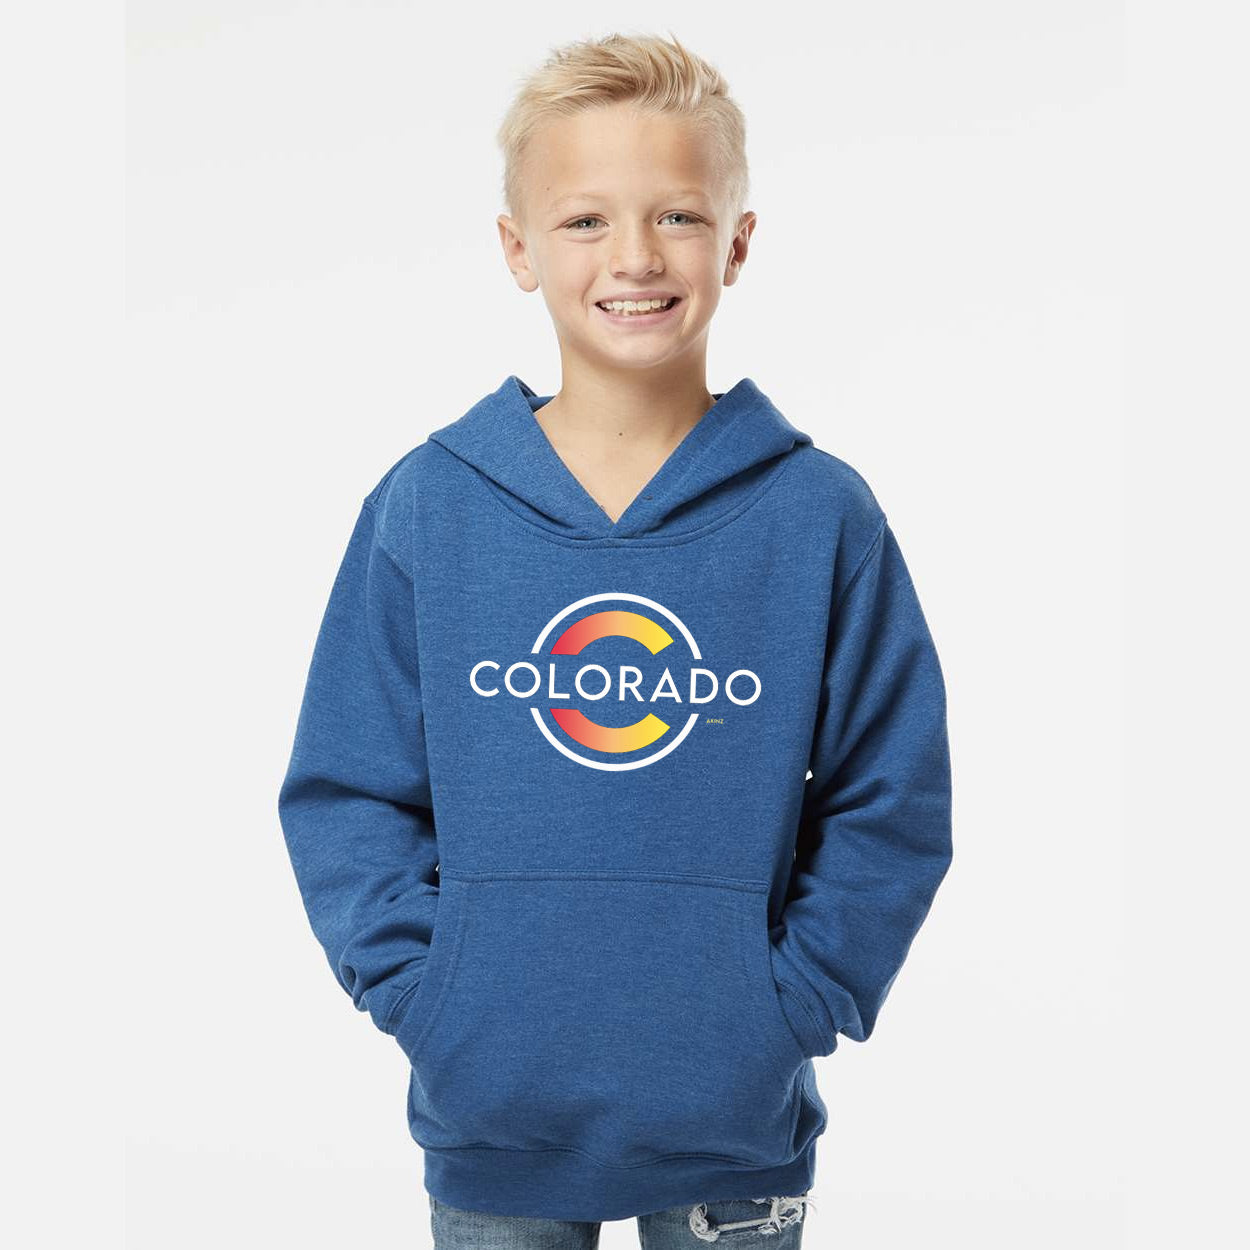 Classic Colorado Youth Hoodie